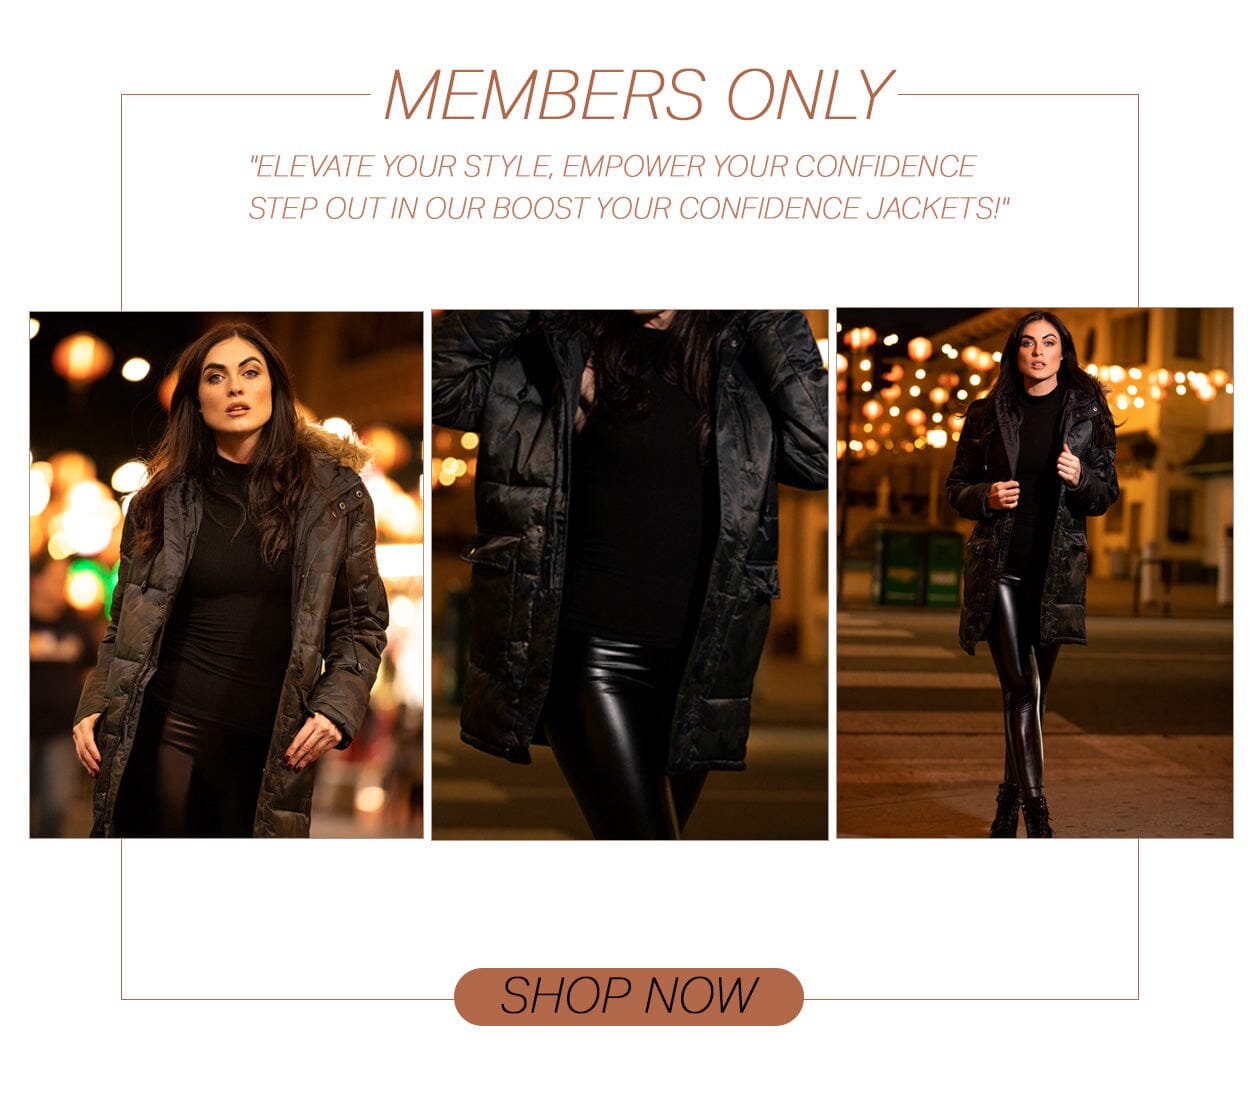 Boost Your Confidence with Members Only Jackets